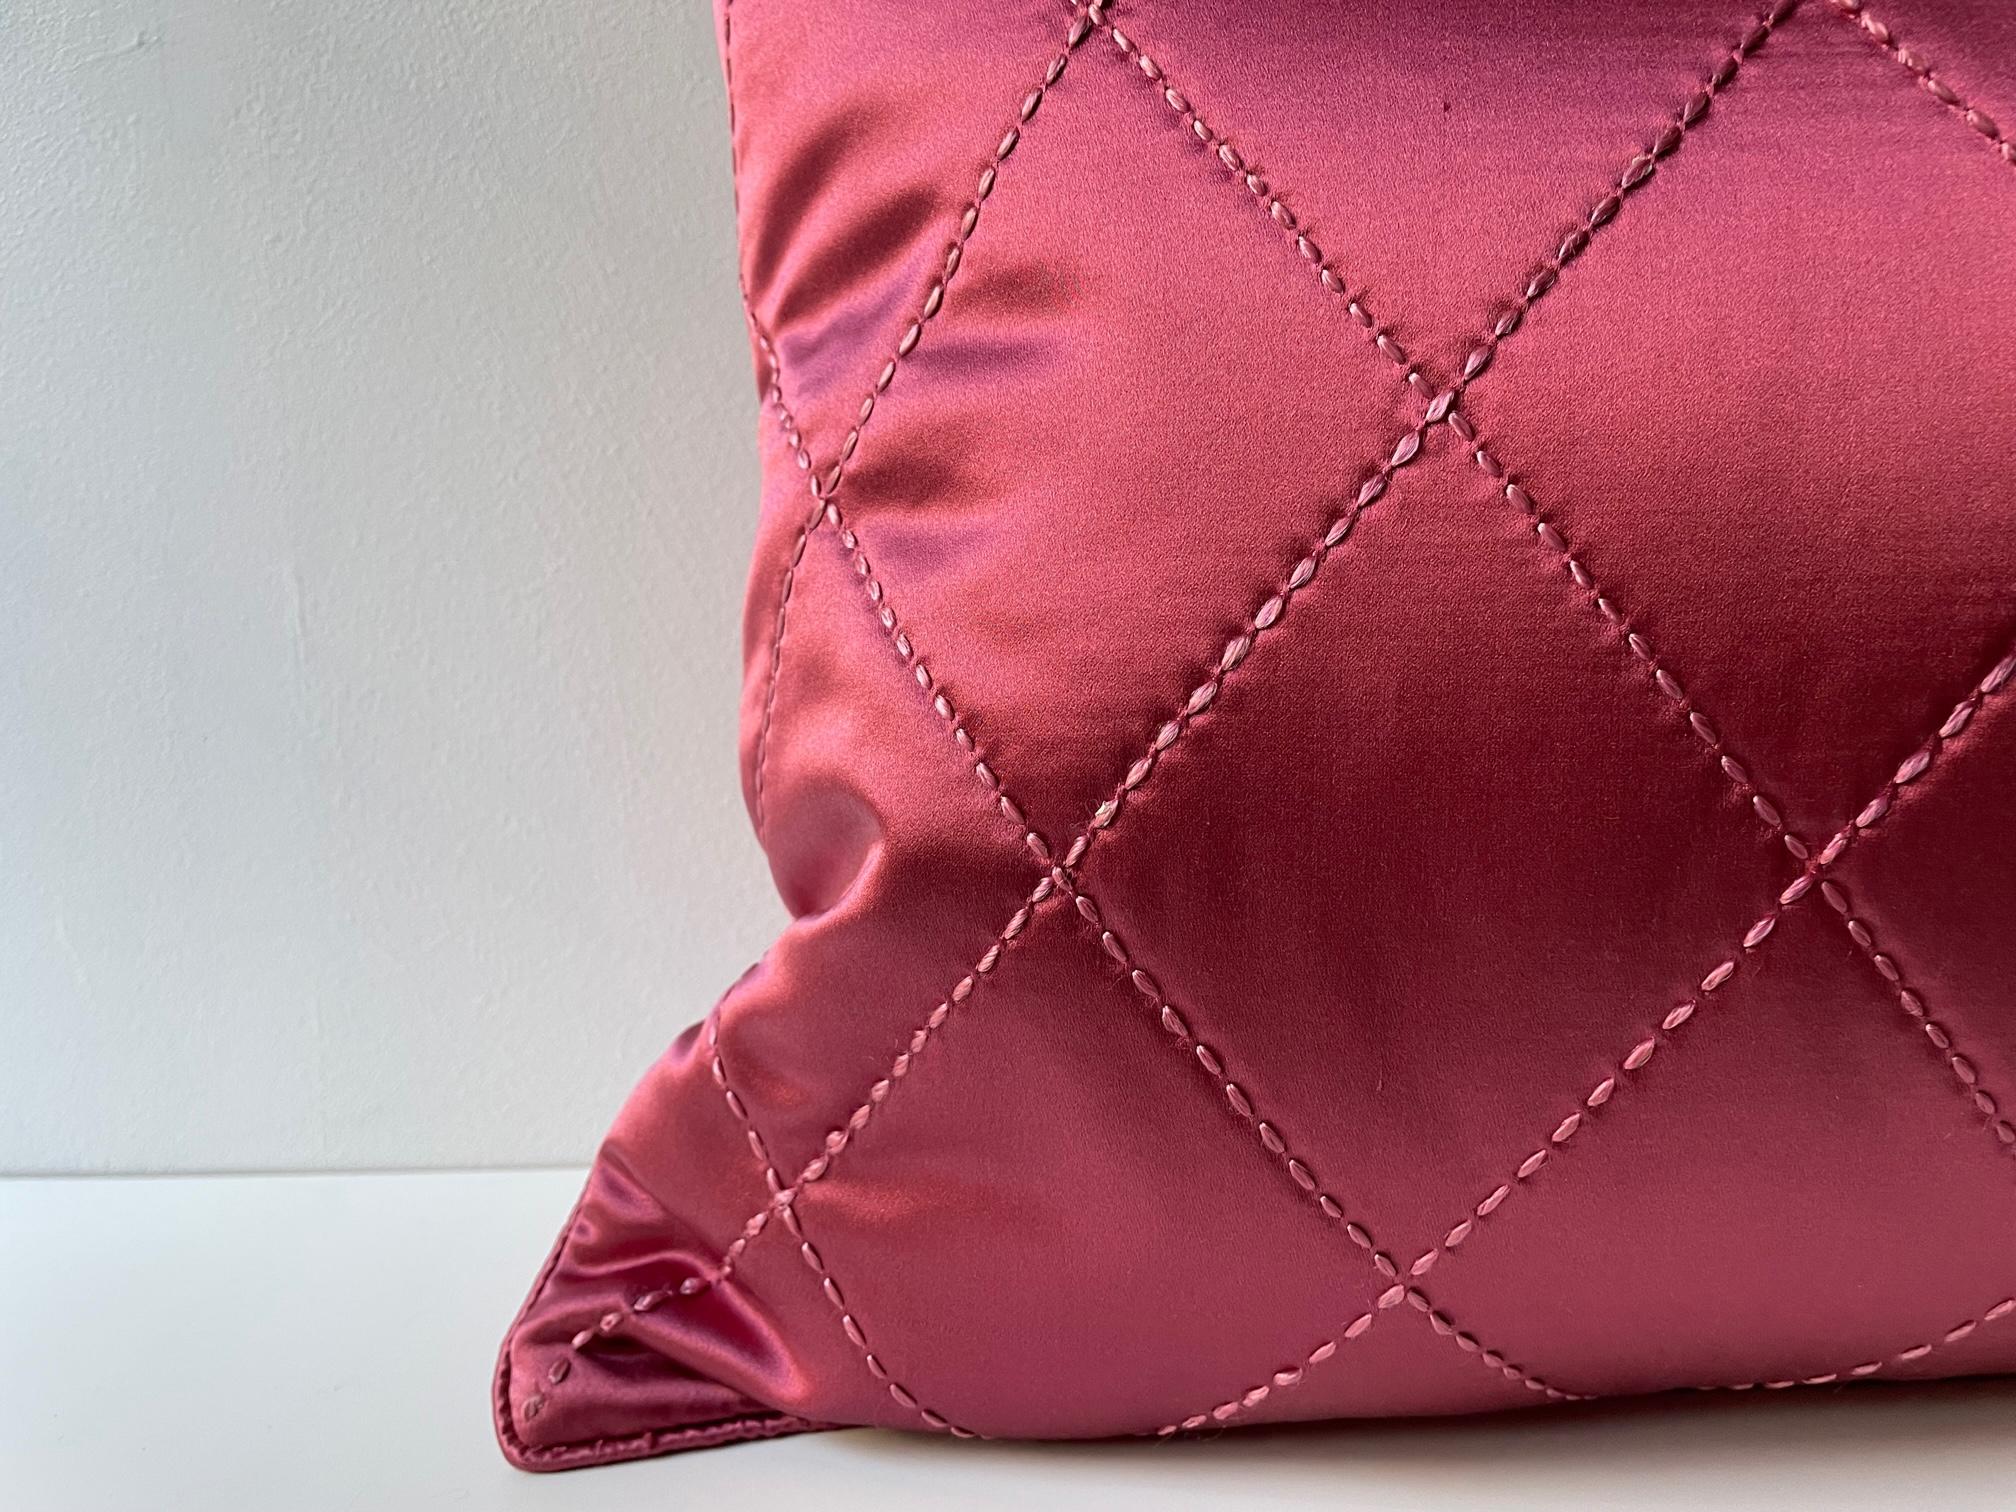 showroom sample, silk satin cushion, col. strawberry red, hand quilted, Rhombus Pattern at the front, plain silk satin at the back, cotton lining, 
Size 32x52cm 
NO FEATHER PAD WILL BE SUPPLIED.